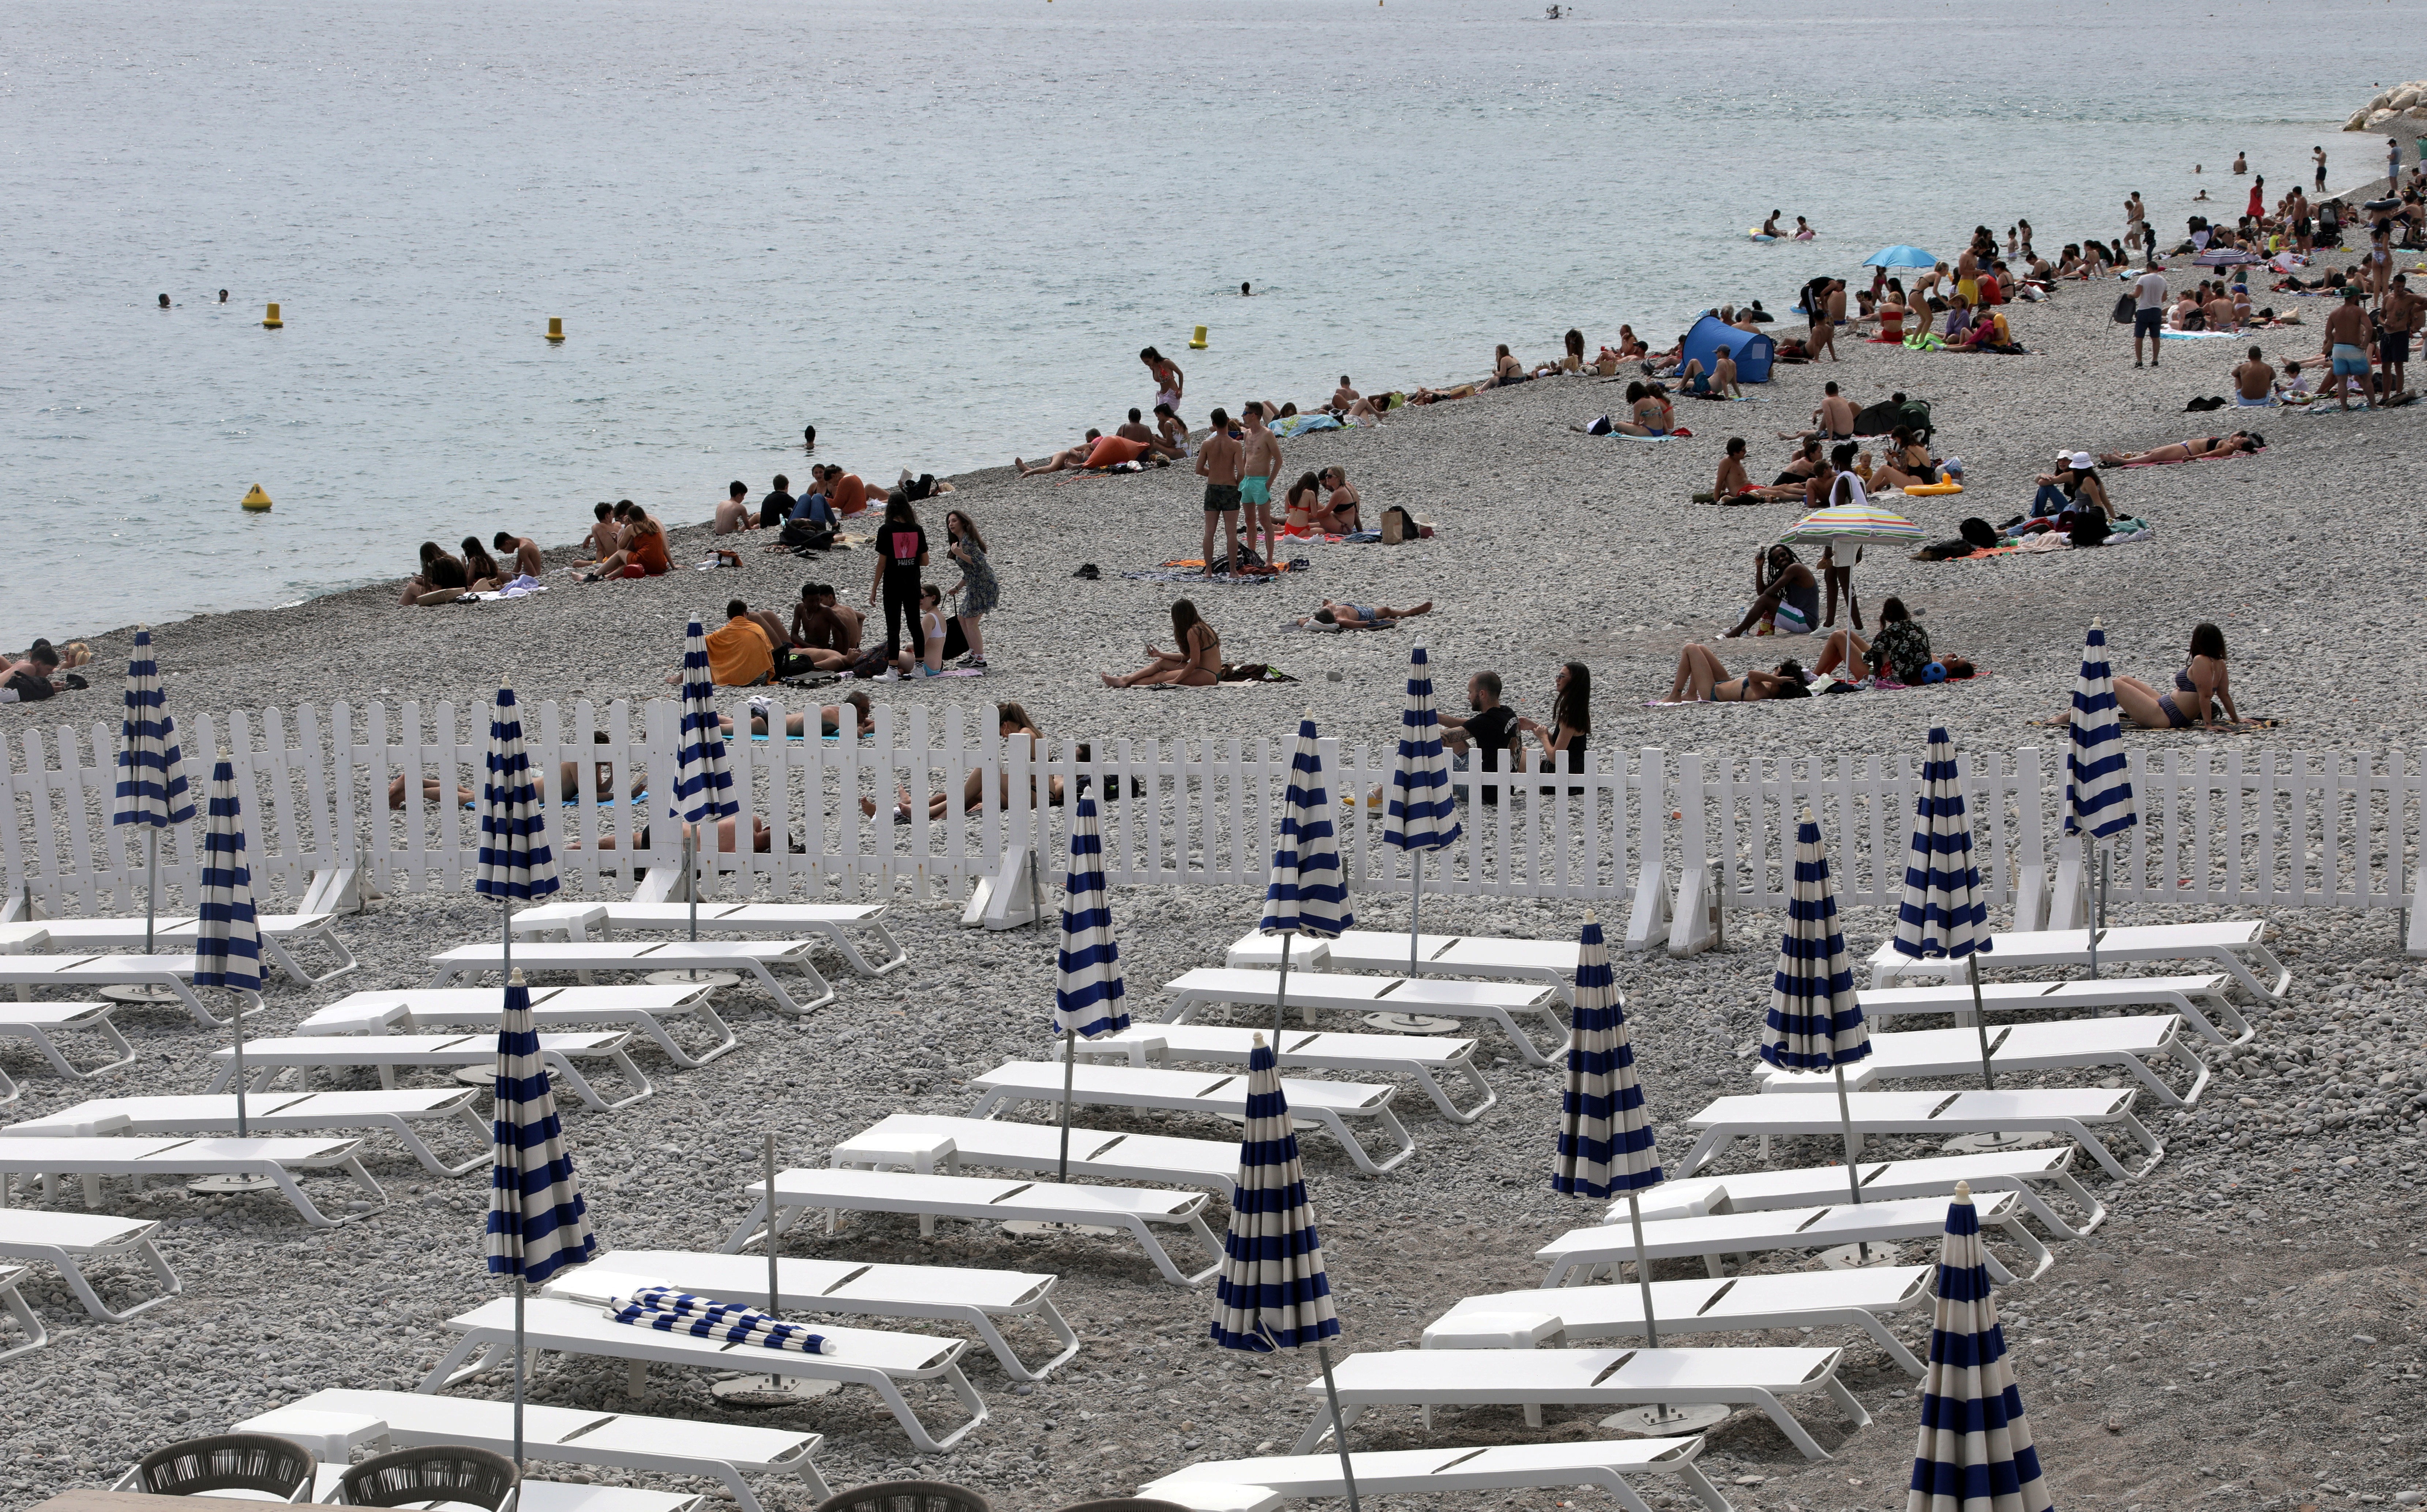 Deckchairs are aligned respecting social distancing on a private beach in Nice